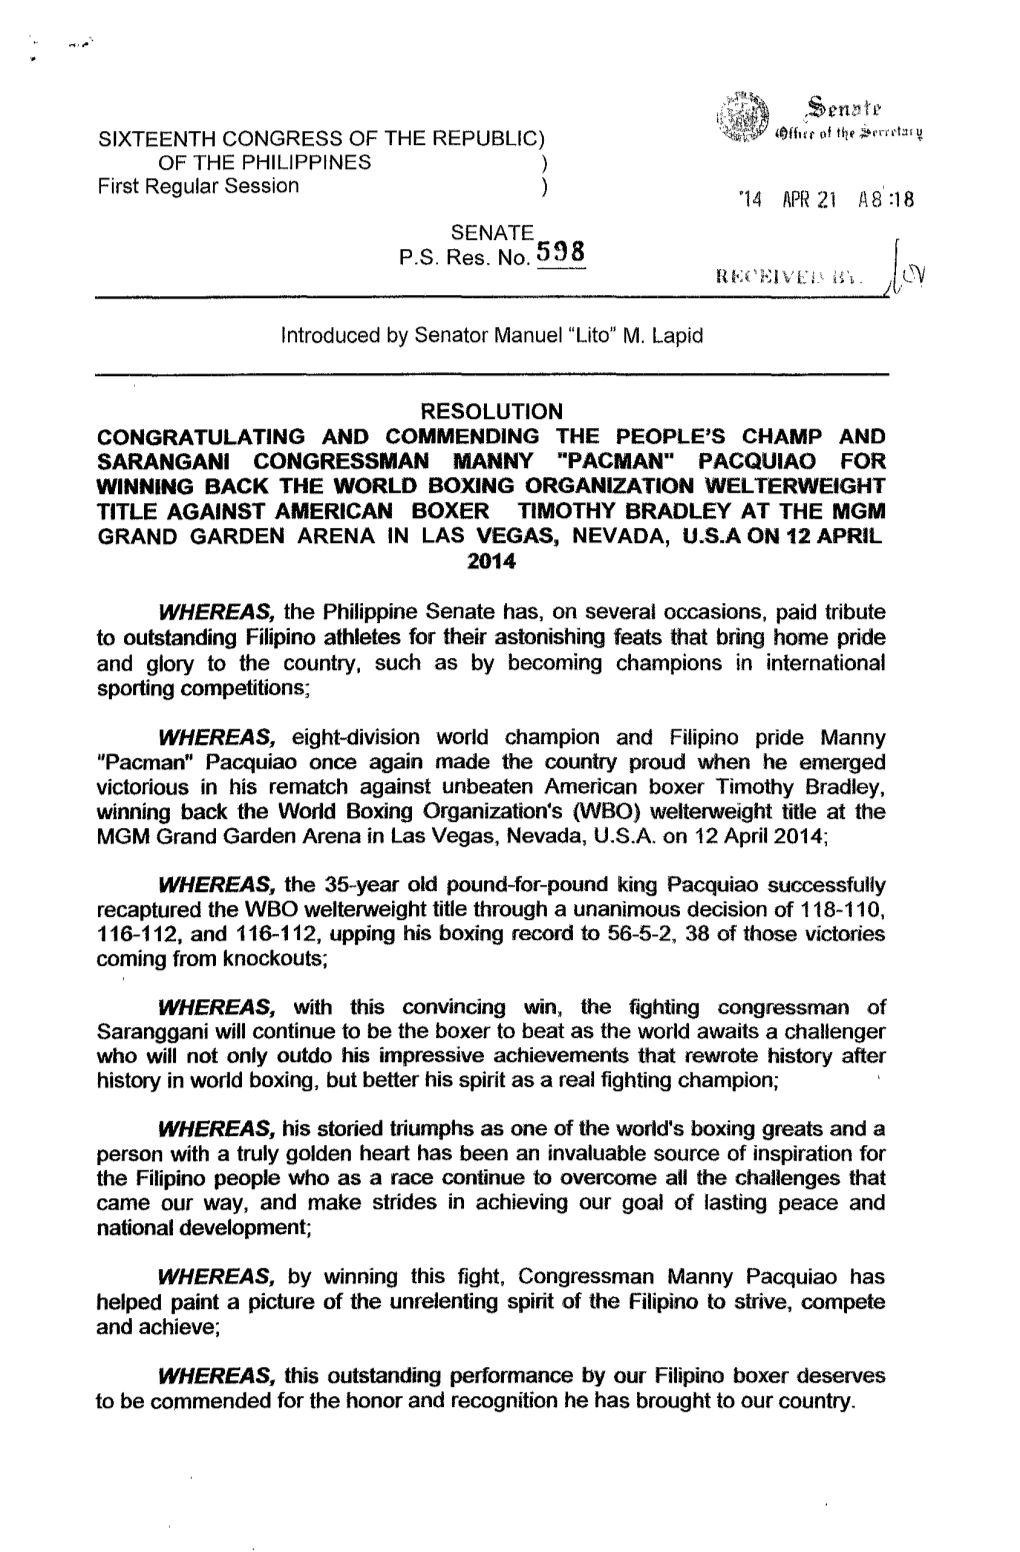 Enlltl' '14 APR 21 1\8:18 RESOLUTION CONGRATULATING and COMMENDING the PEOPLE's CHAMP and SARANGANI CONGRESSMAN MANNY "P